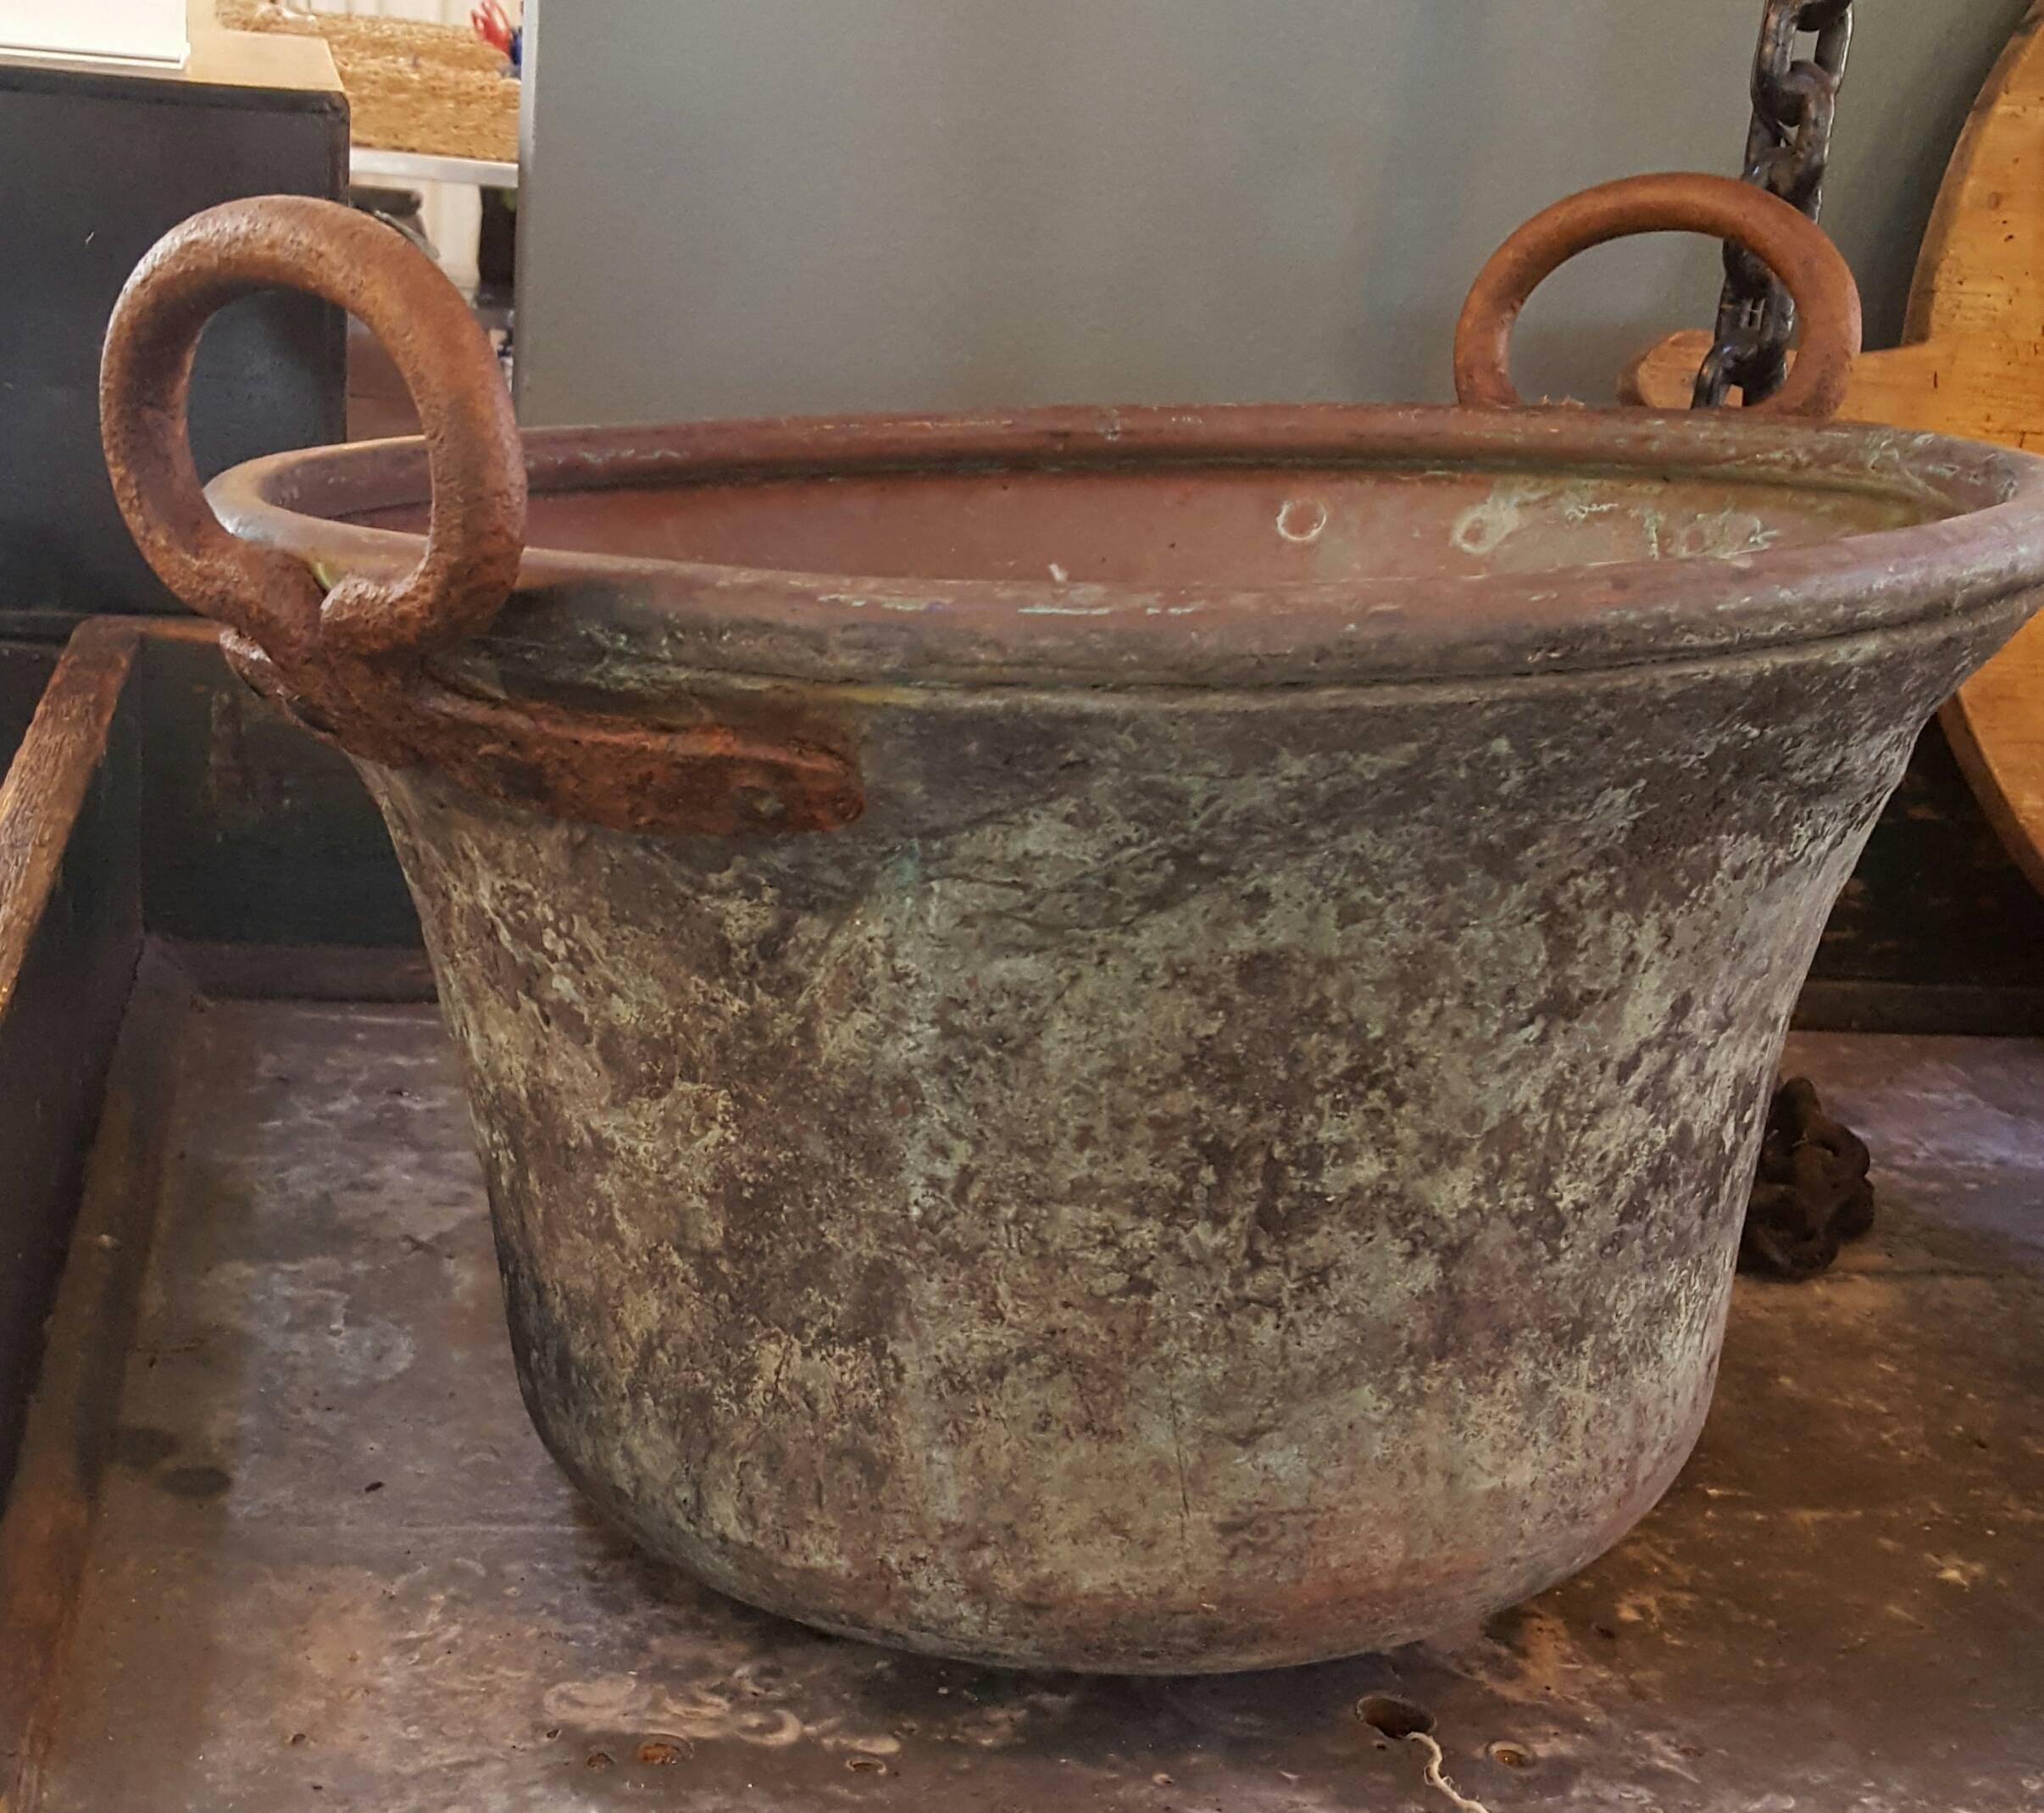 Late 19th Century Copper Buckets with Iron Handles from France, circa 1890